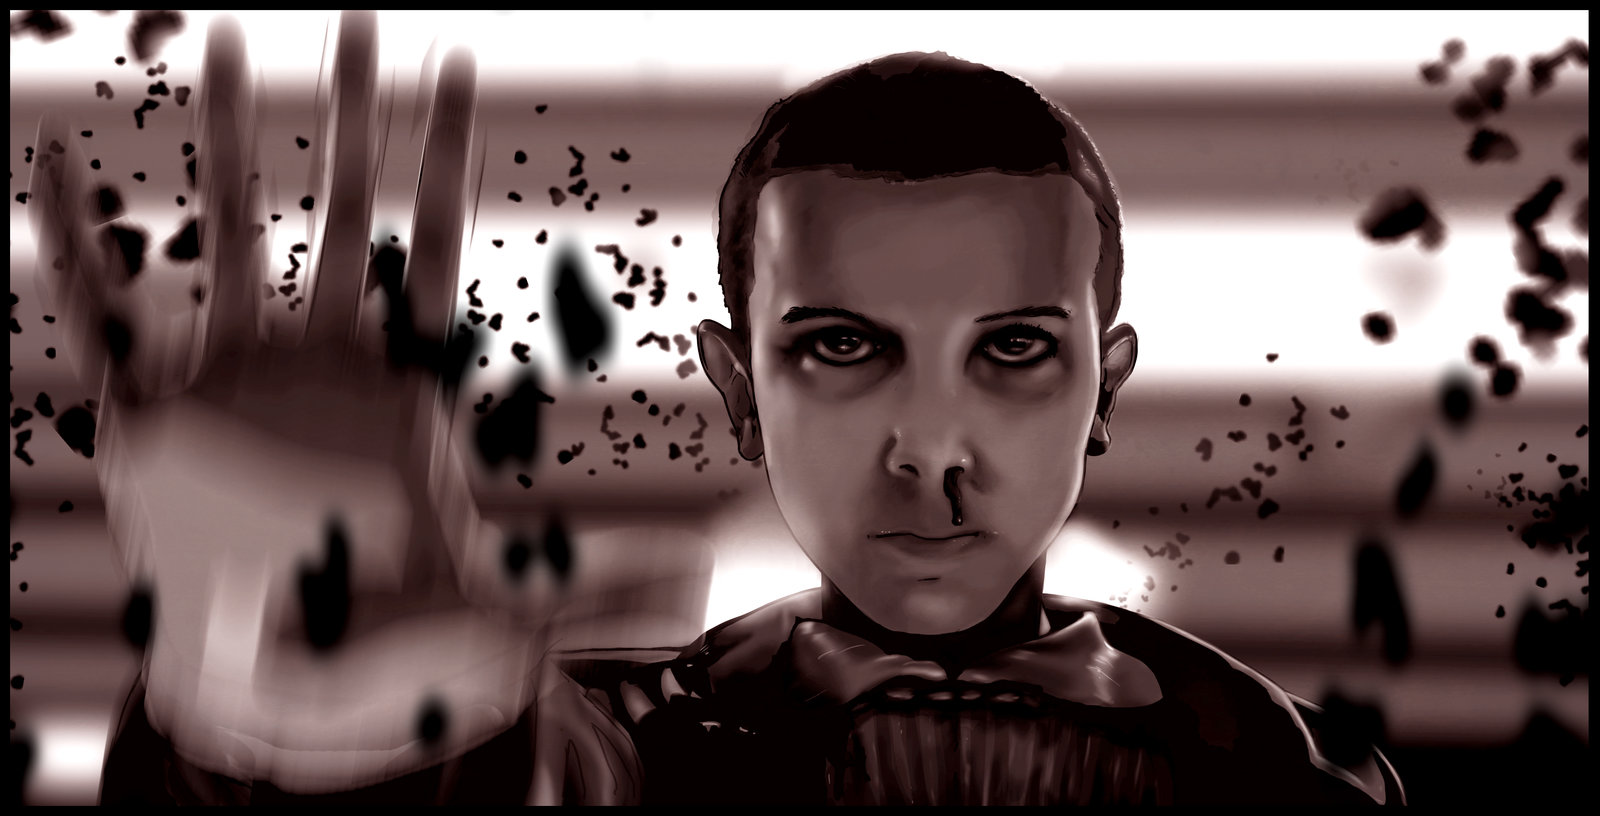 Eleven Stranger Things by Mckdirt 1600x816. 